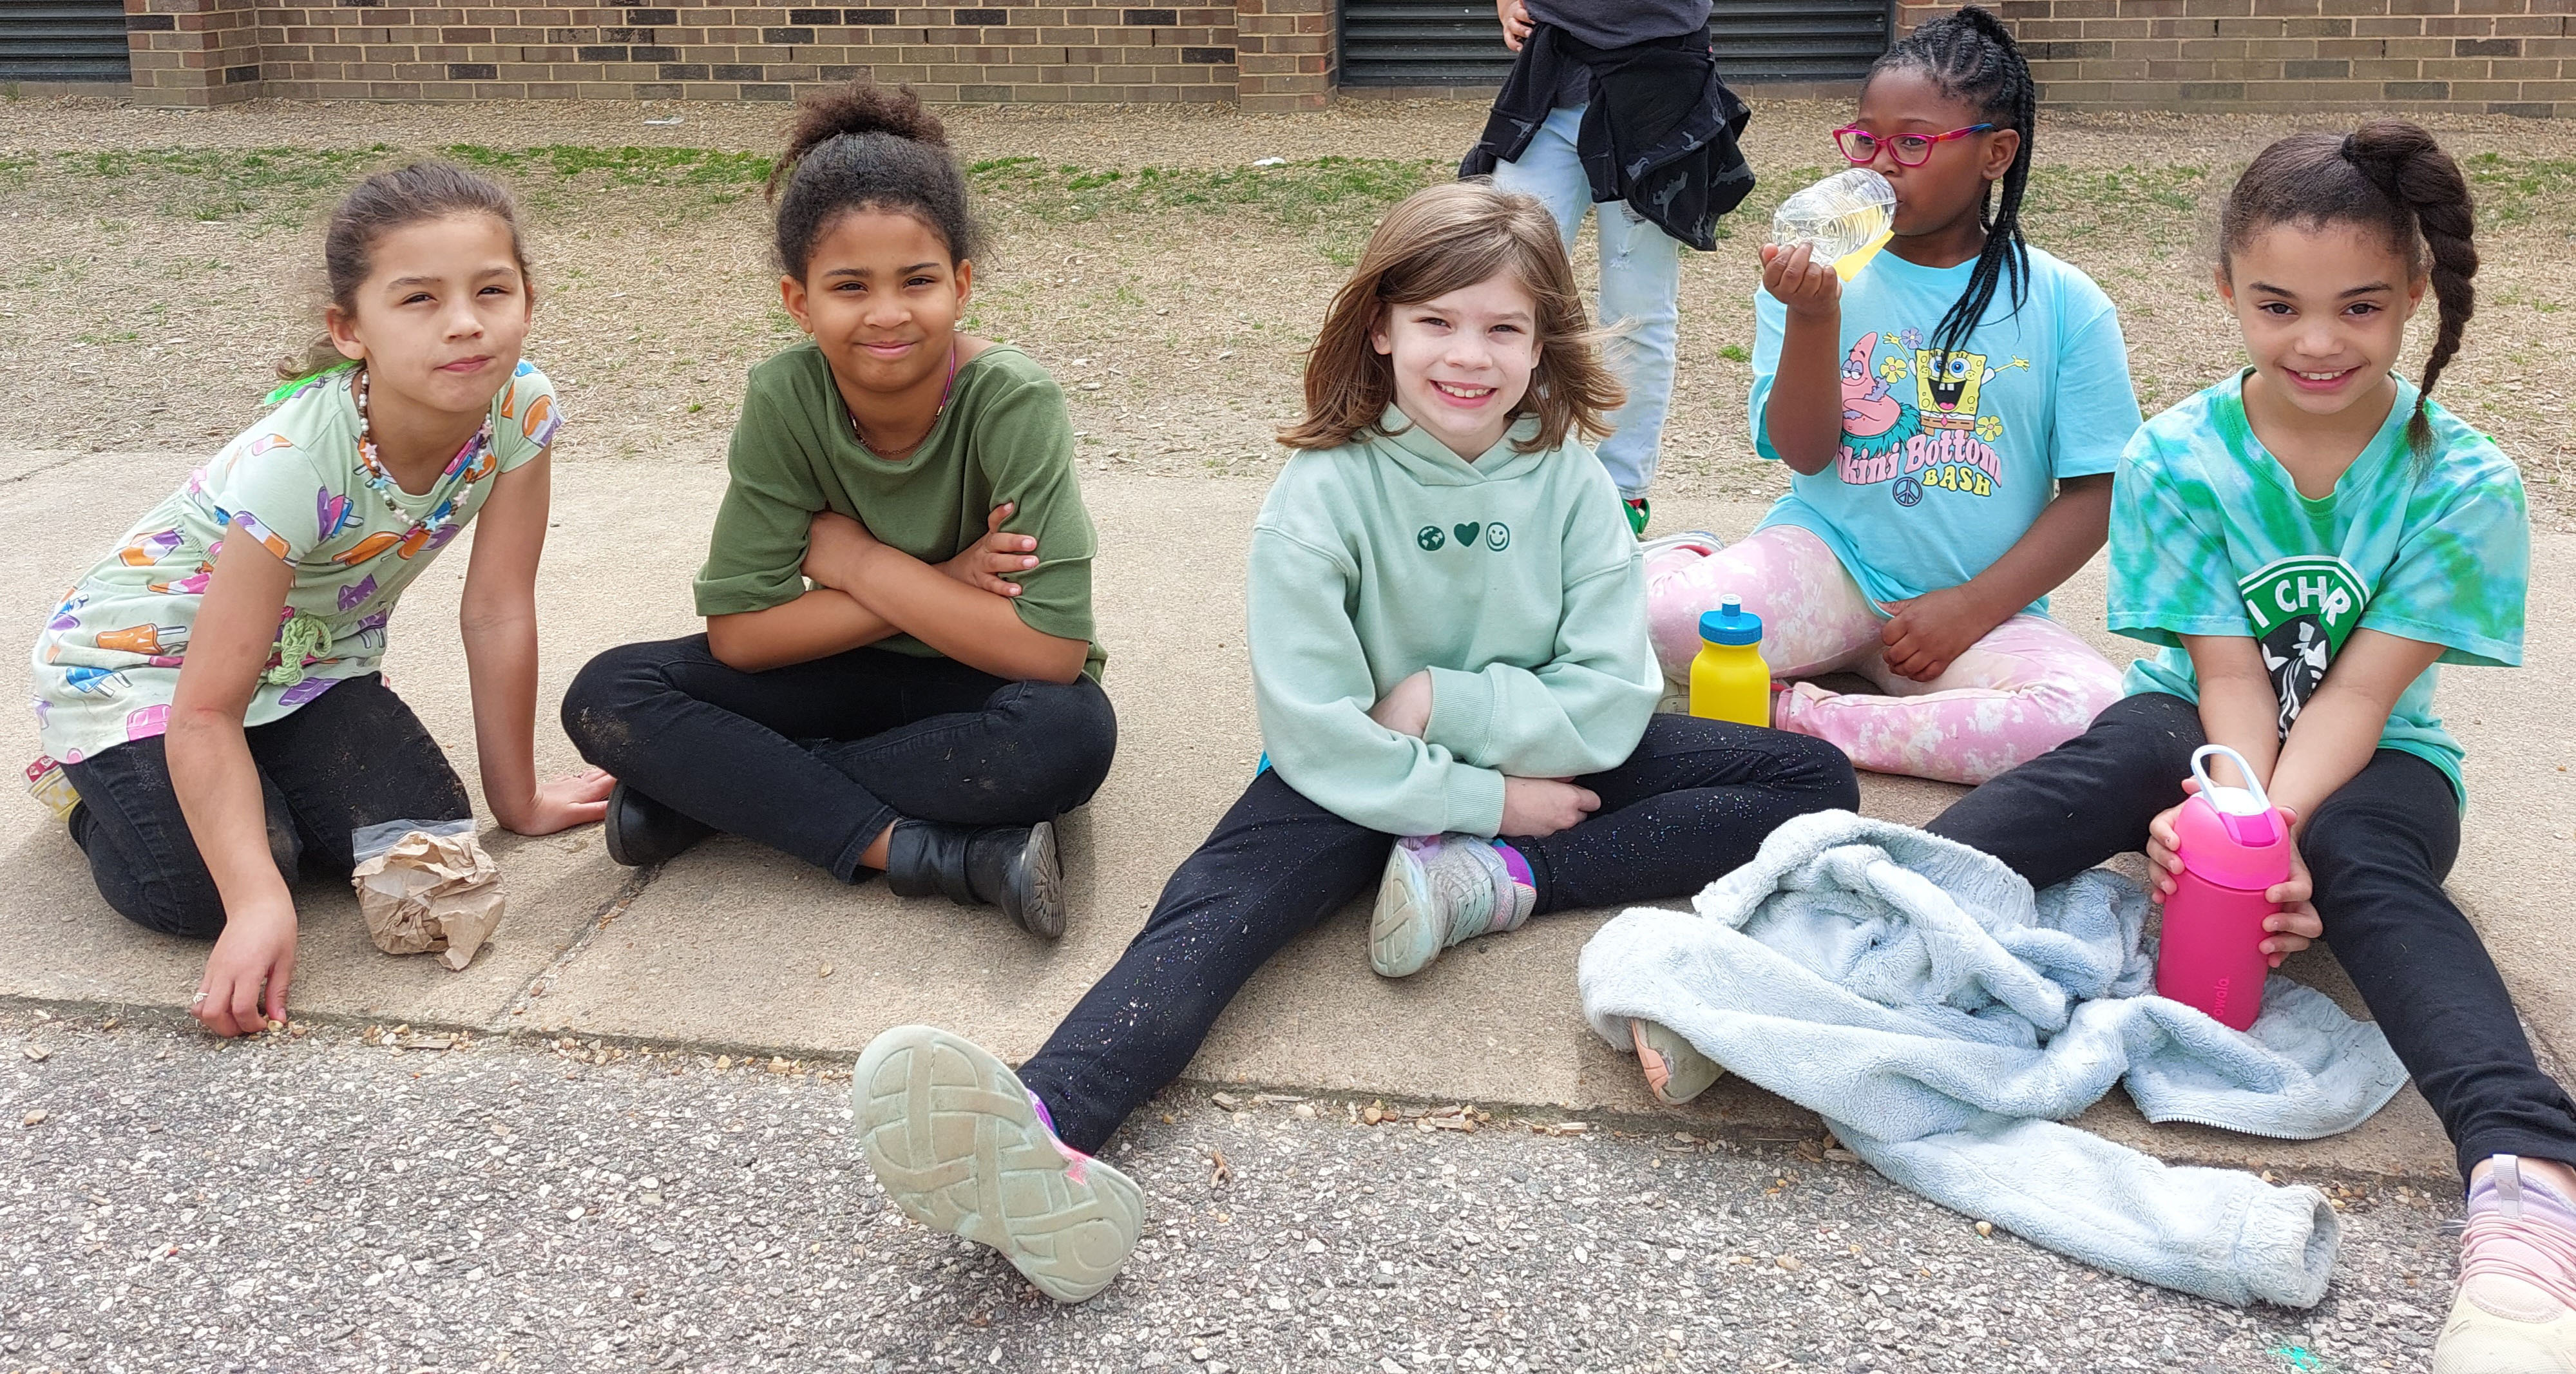 Five girls resting outside during field day